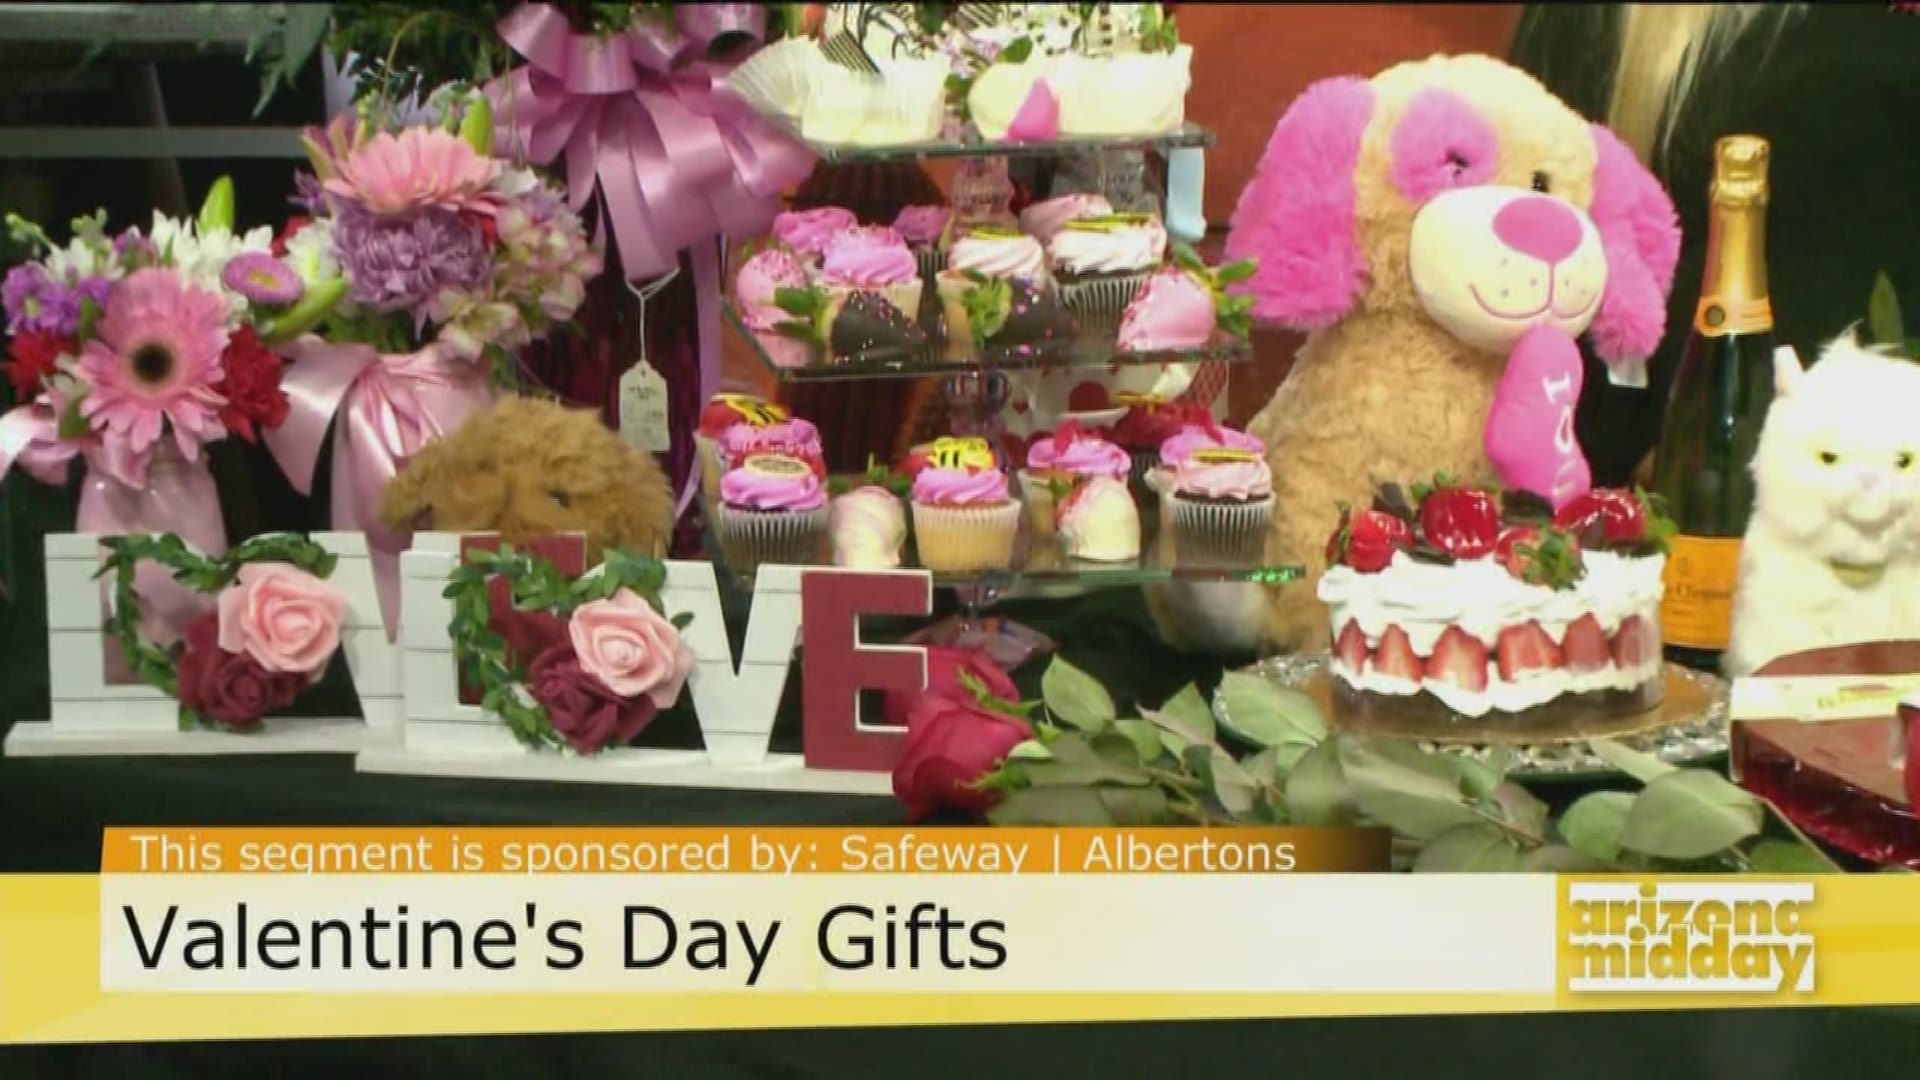 Nancy Keane from Safeway and Albertsons shares what is trending for Valentine's Day and gives tips for all the last minute shoppers!